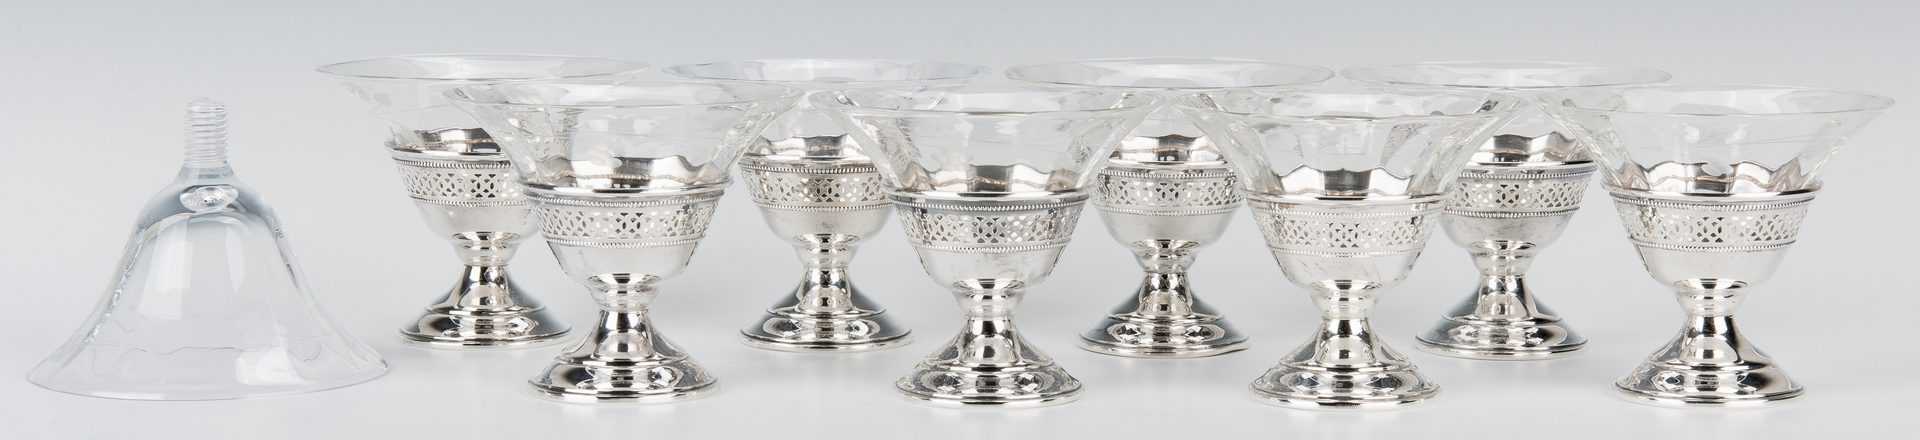 Lot 845: Group Sterling table items incl. Sanborns, 38 items